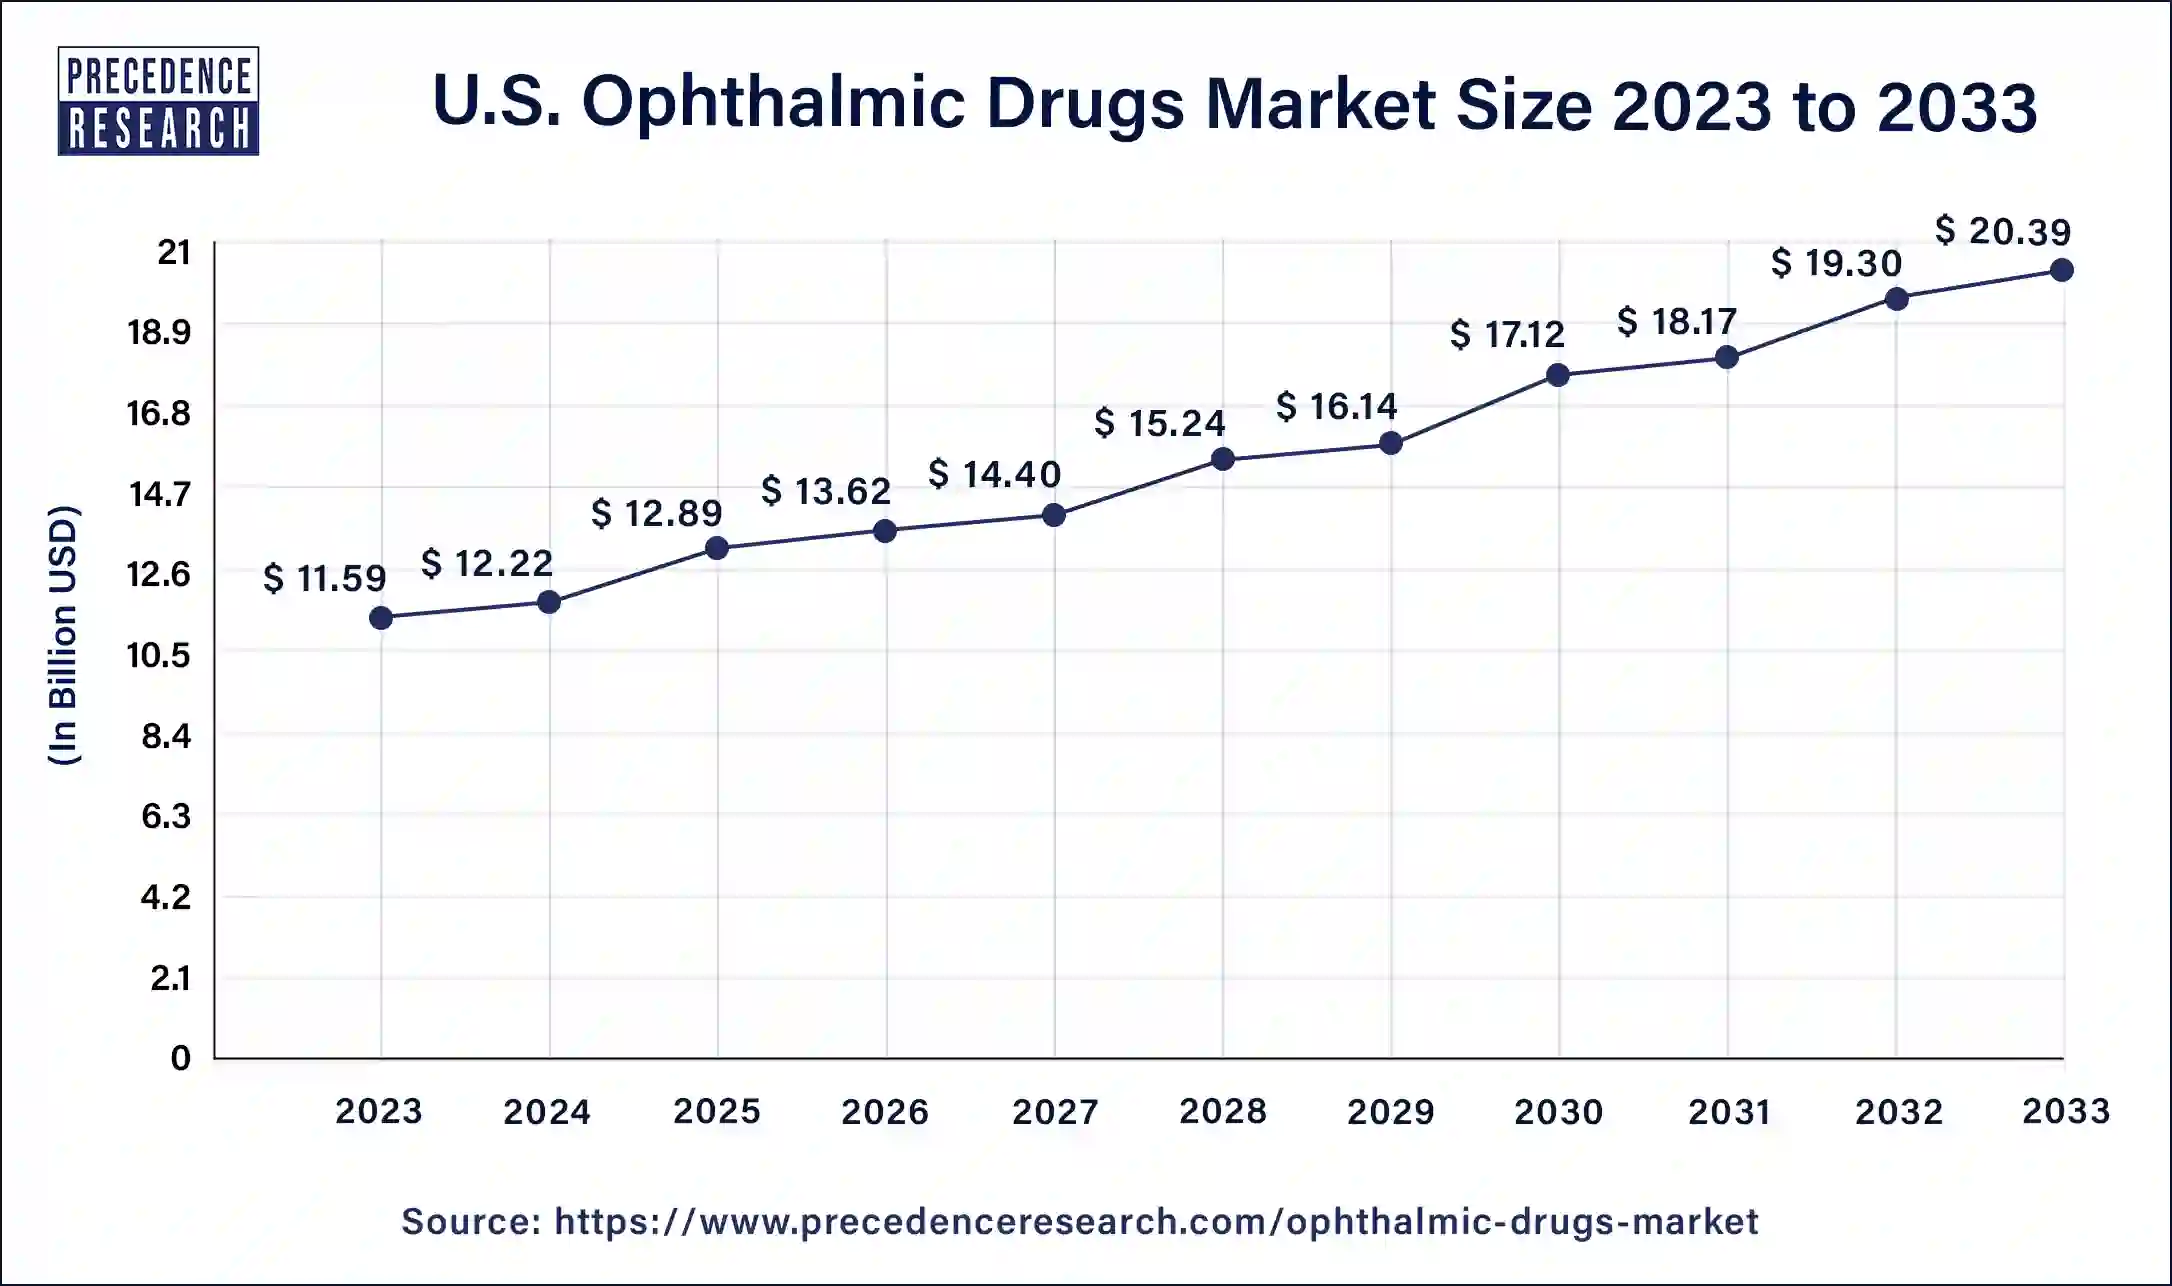 U.S. Ophthalmic Drugs Market Size 2024 To 2033